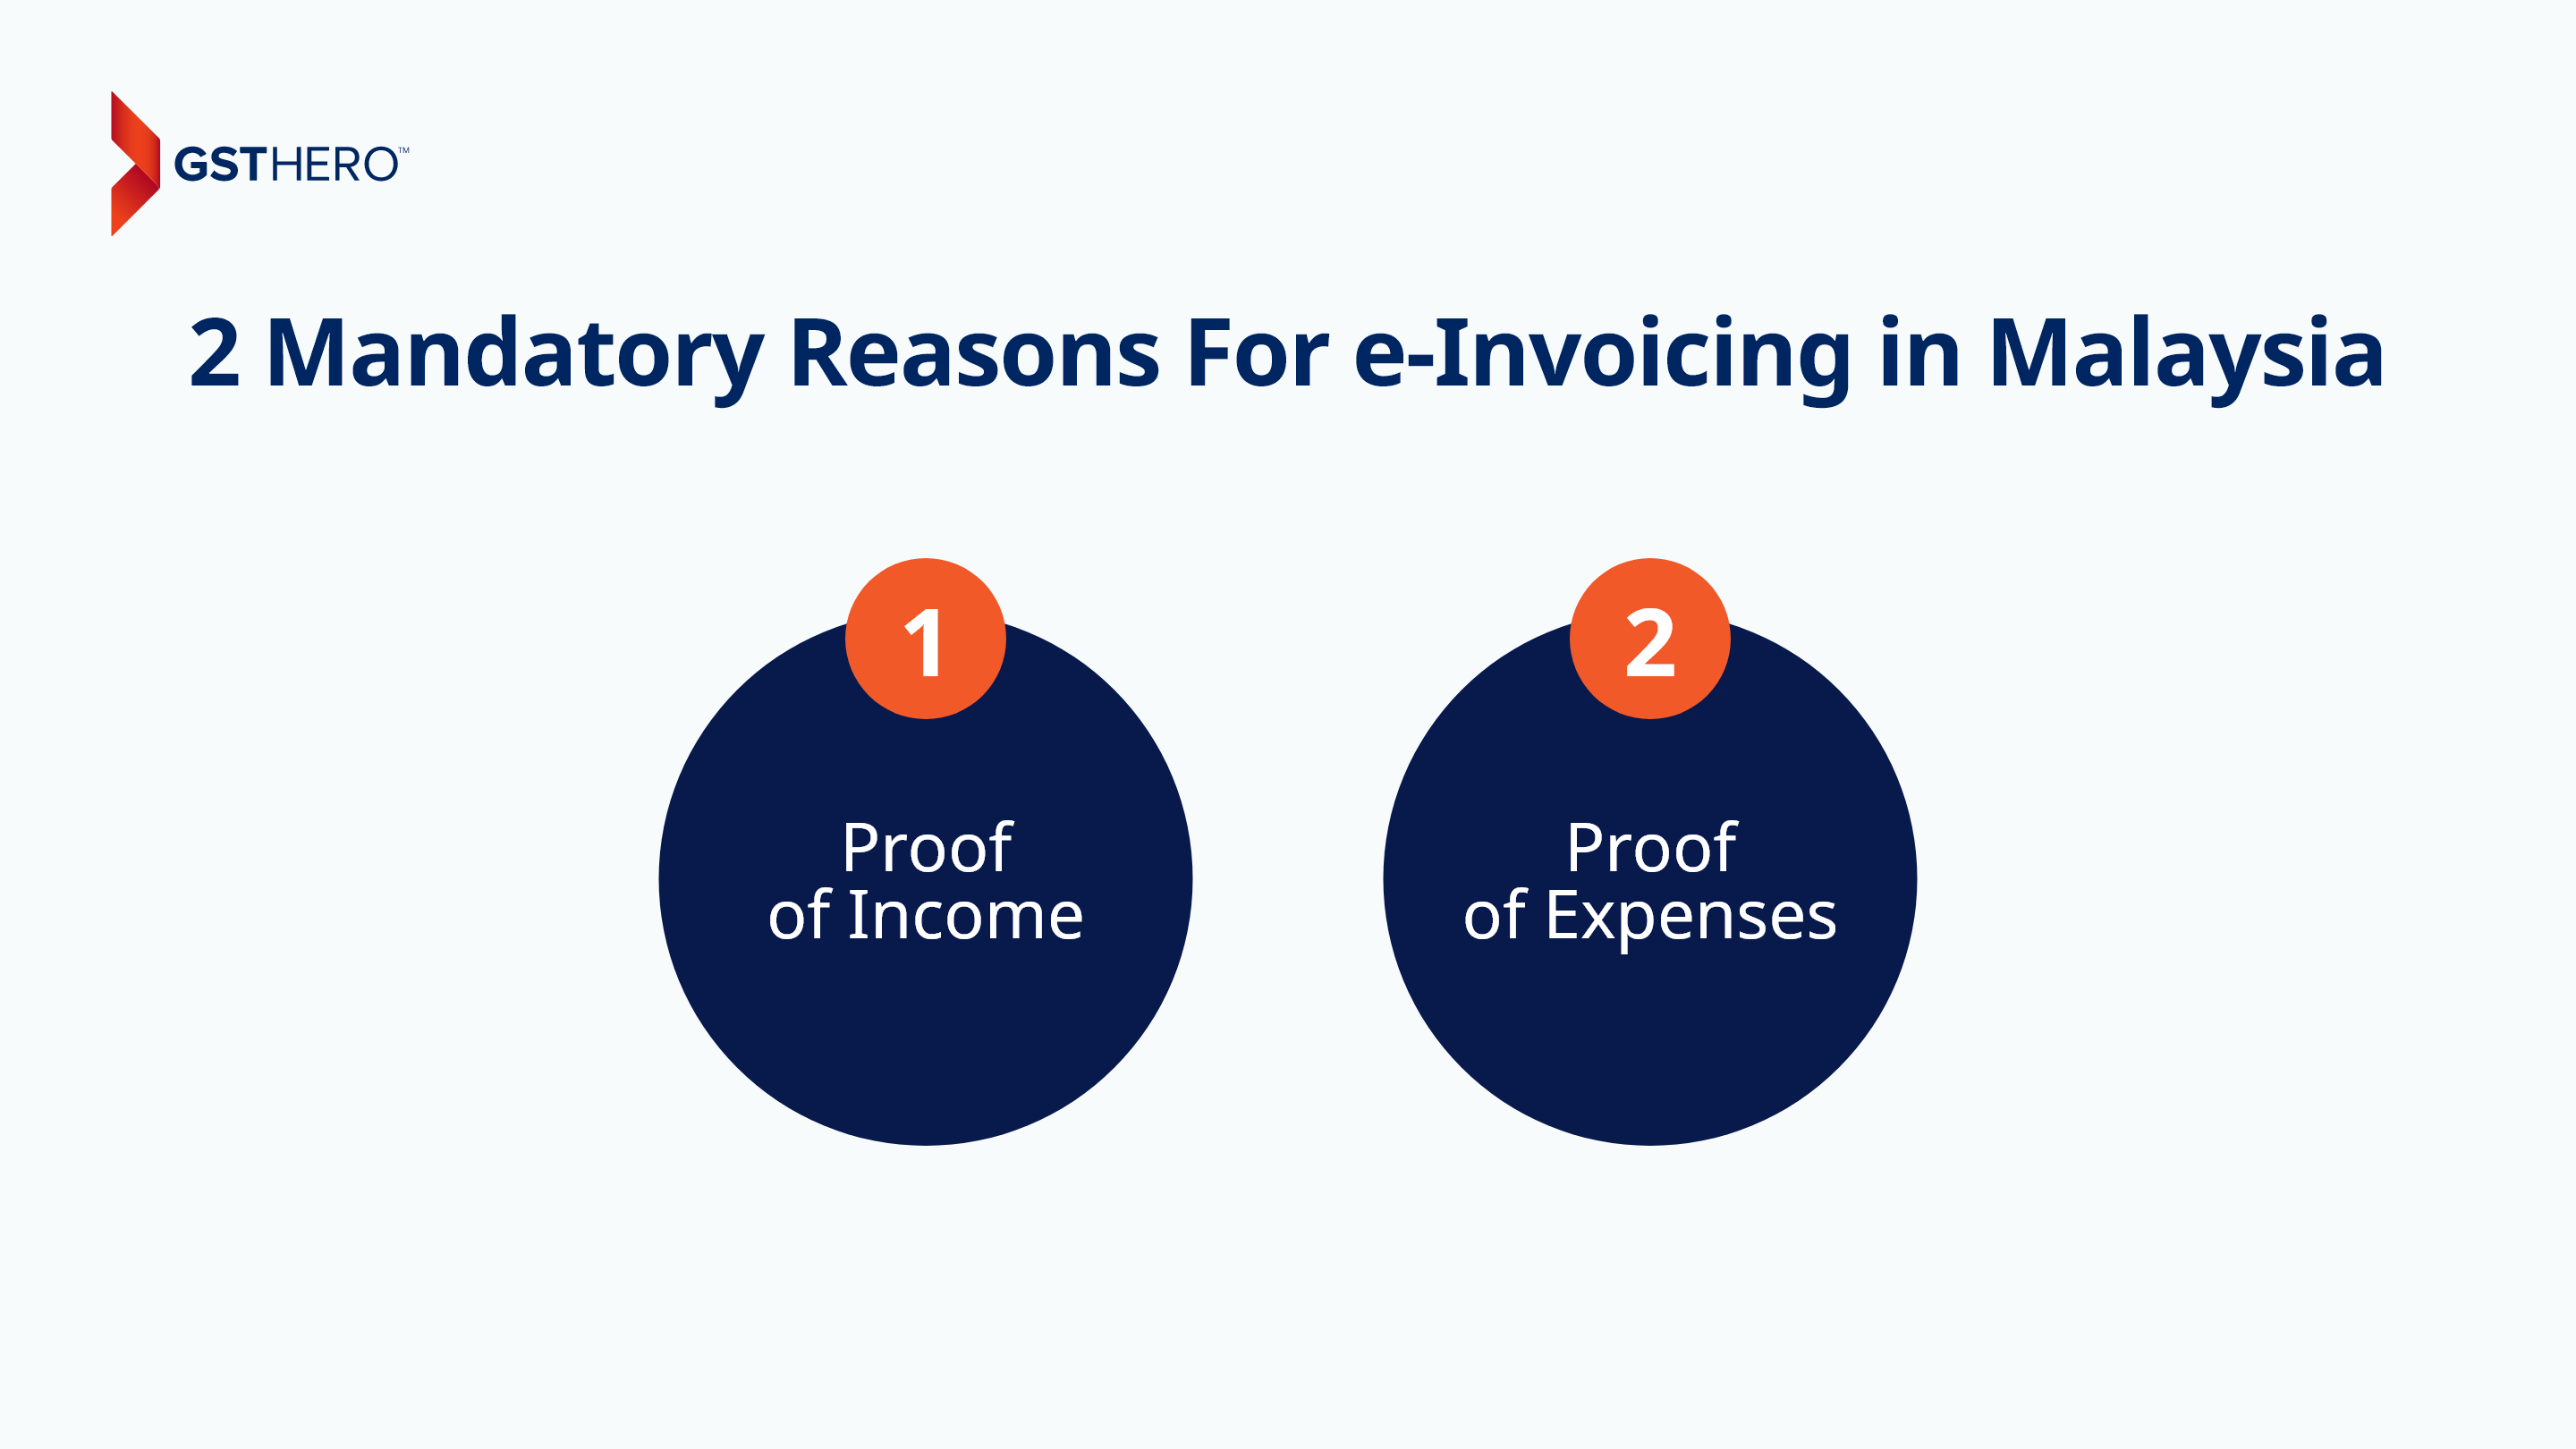 2 Mandatory Reasons For e-Invoicing in Malaysia